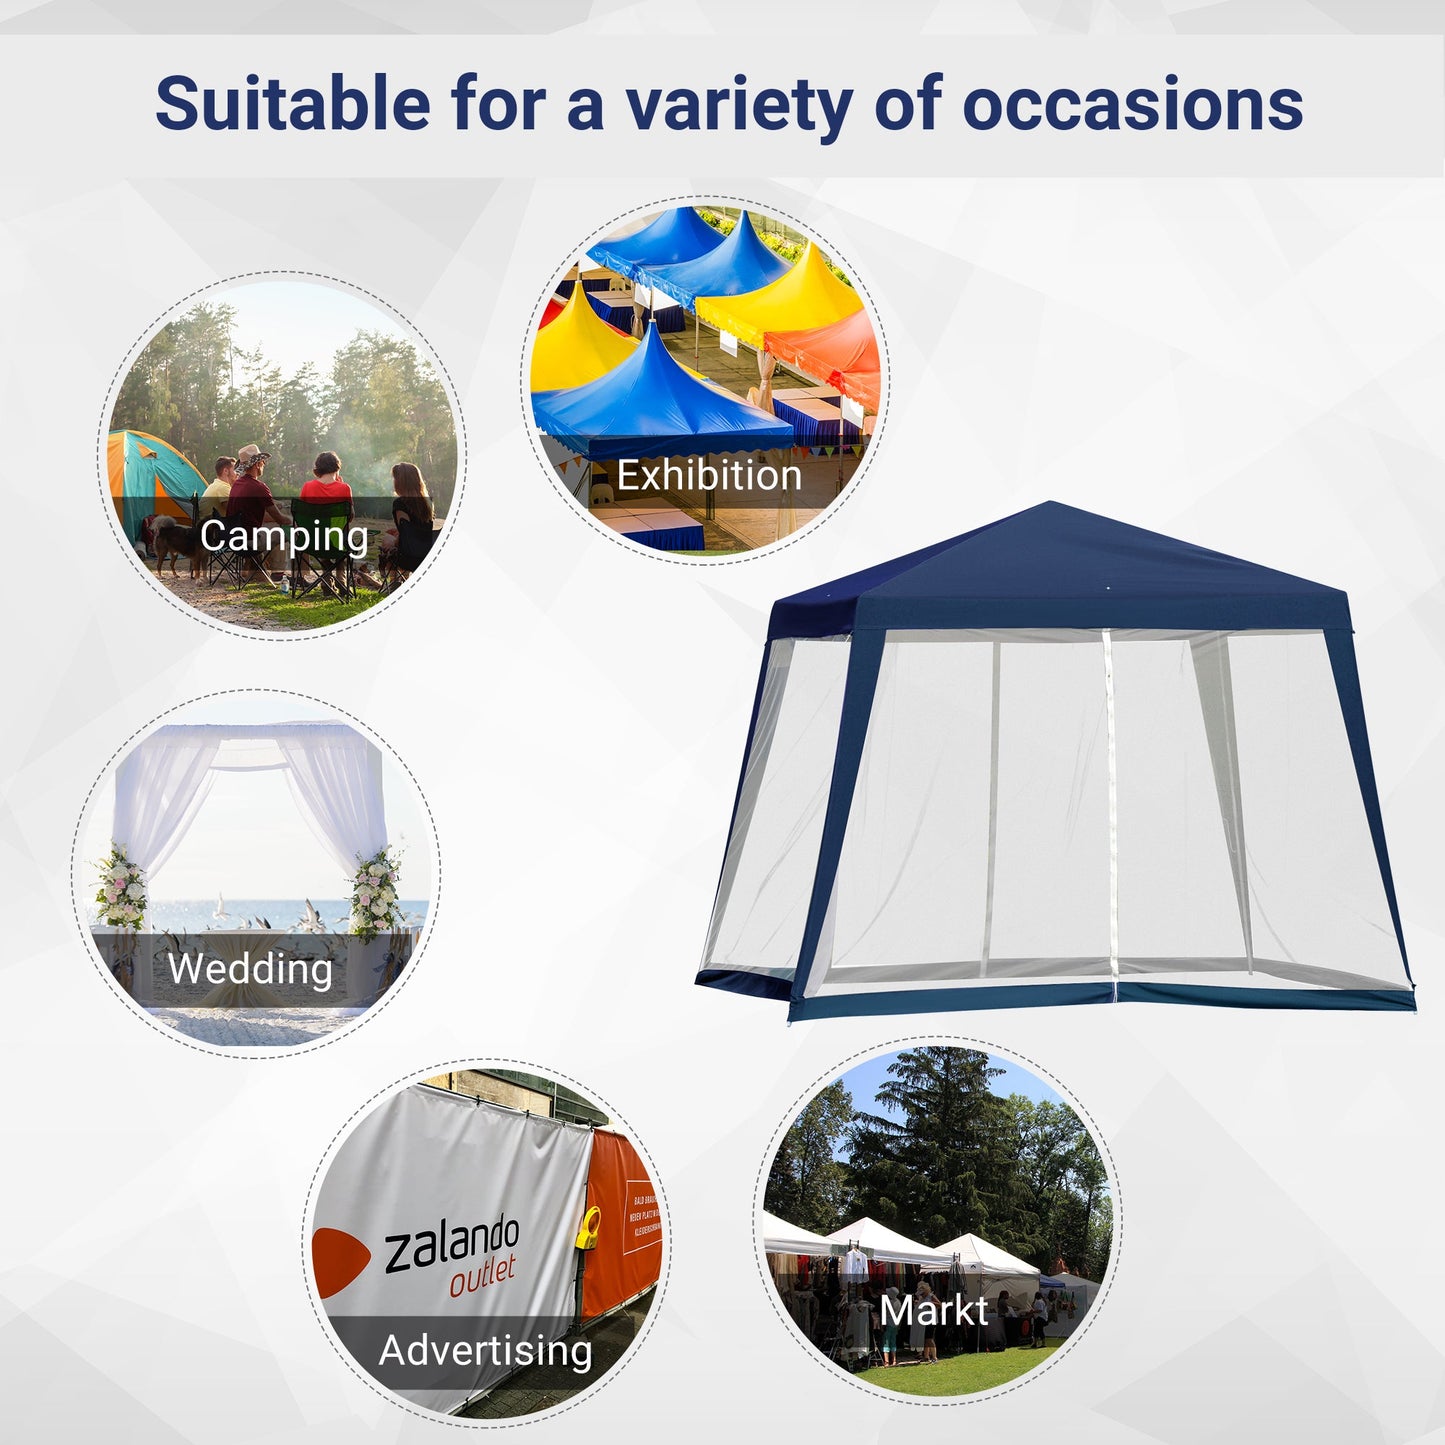 10x10ft Party Tent Canopy with Netting, Patio Screen House Slant Leg Outdoor Gazebo Sun Shade Shelter, Blue at Gallery Canada